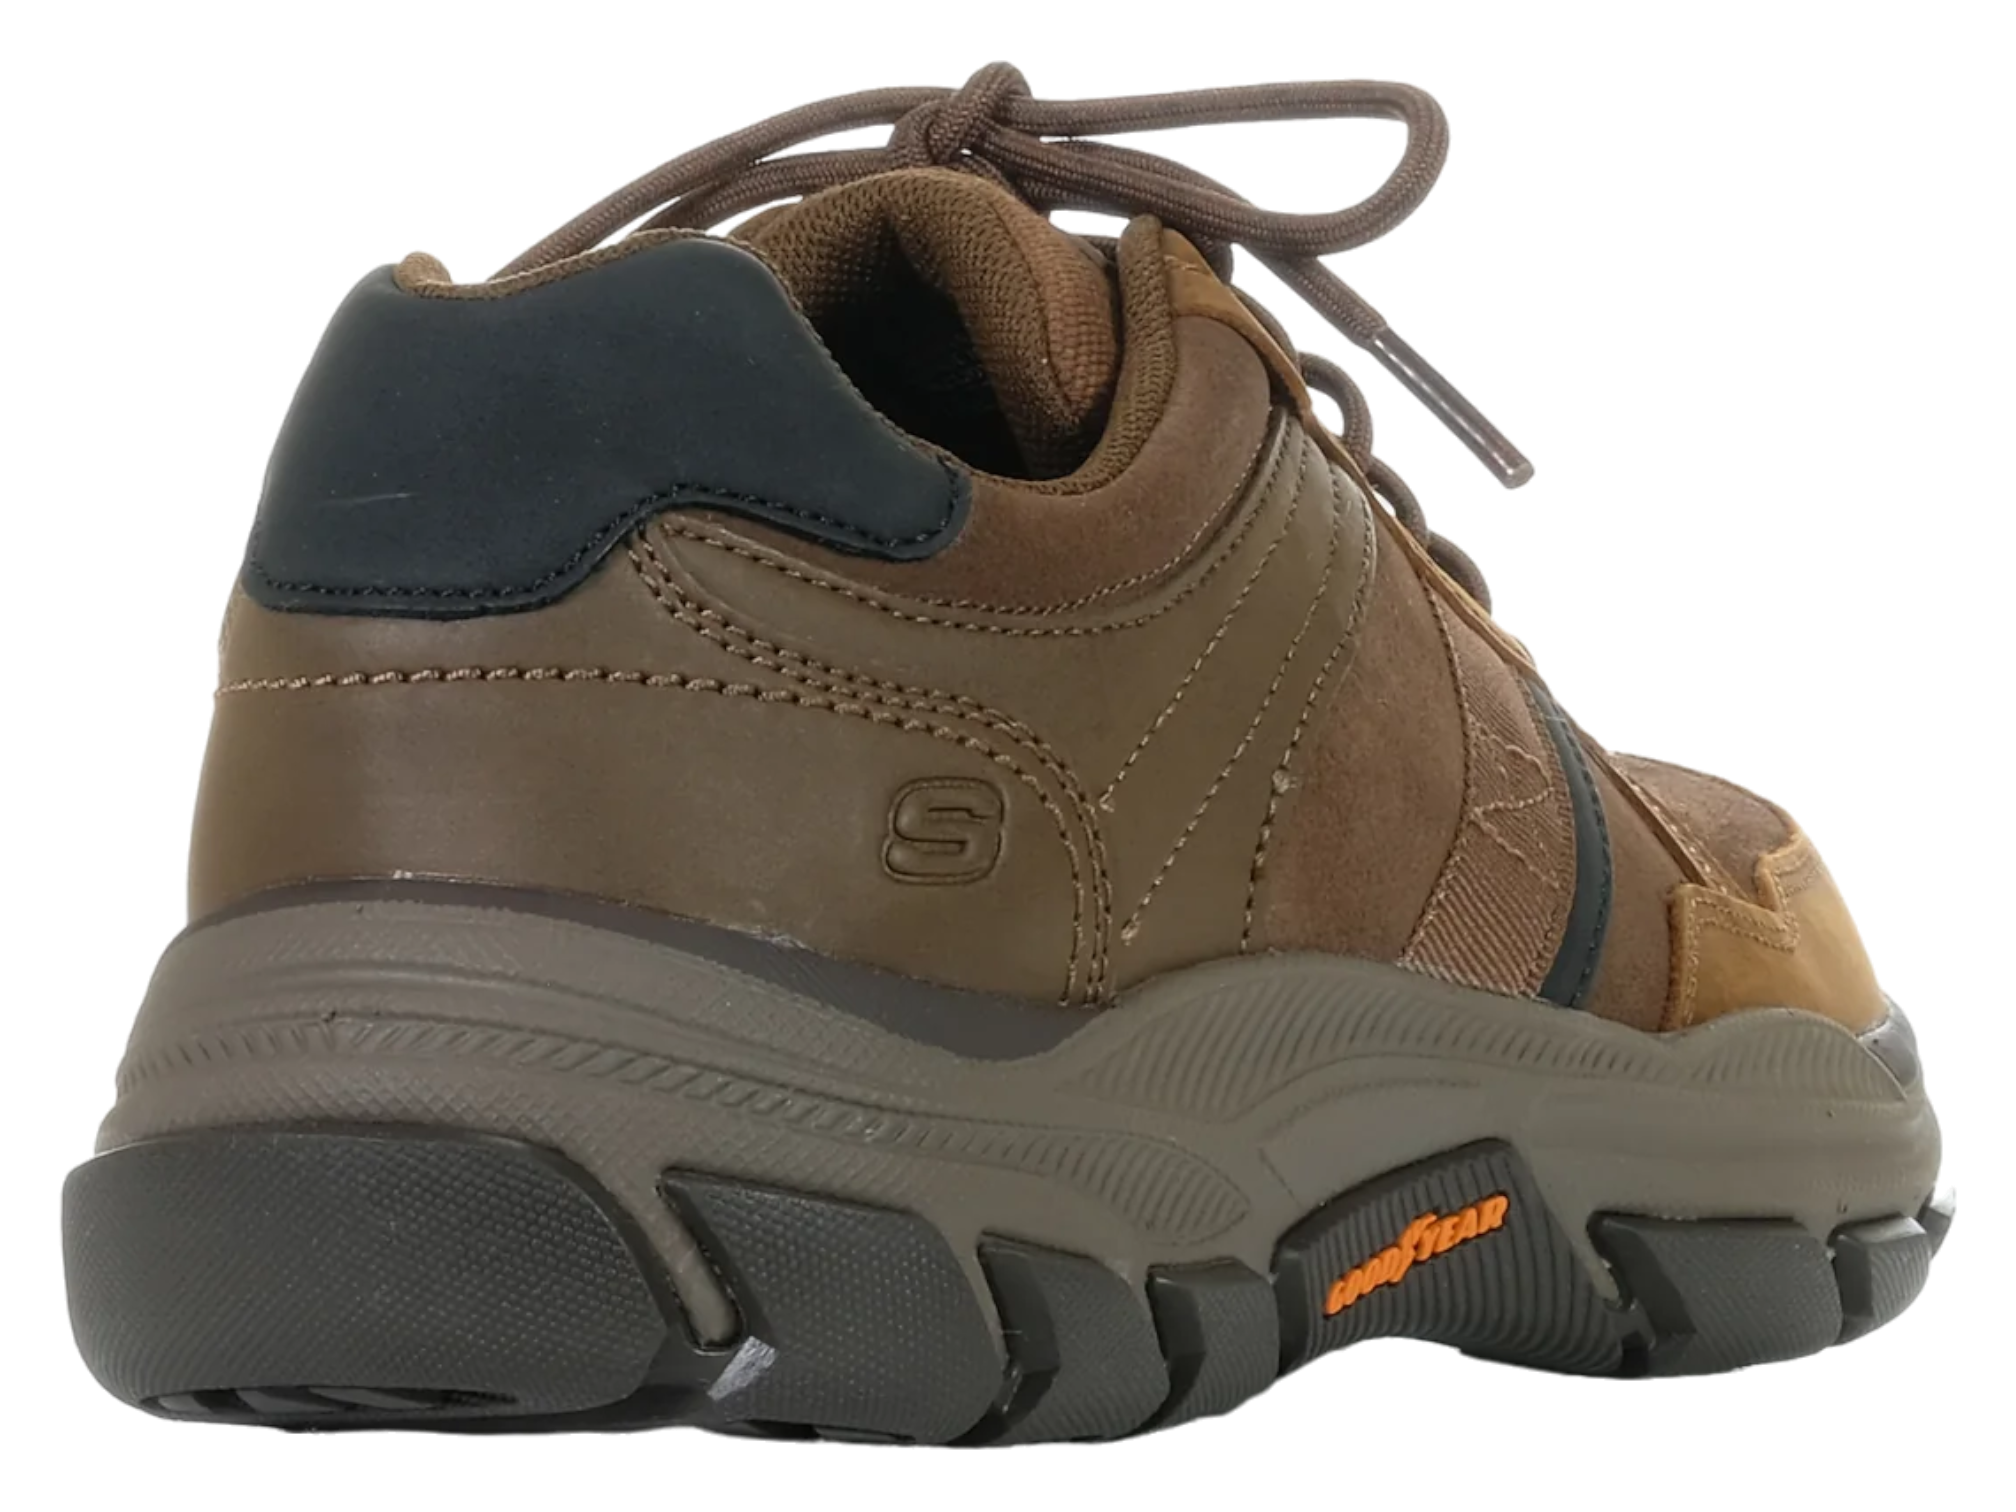 SKECHERS_205128_RELAXED_FIT_RESPECTED_SNEAKER_MENS_DARK_BROWN_BACK_ANGLE-Photoroom.png